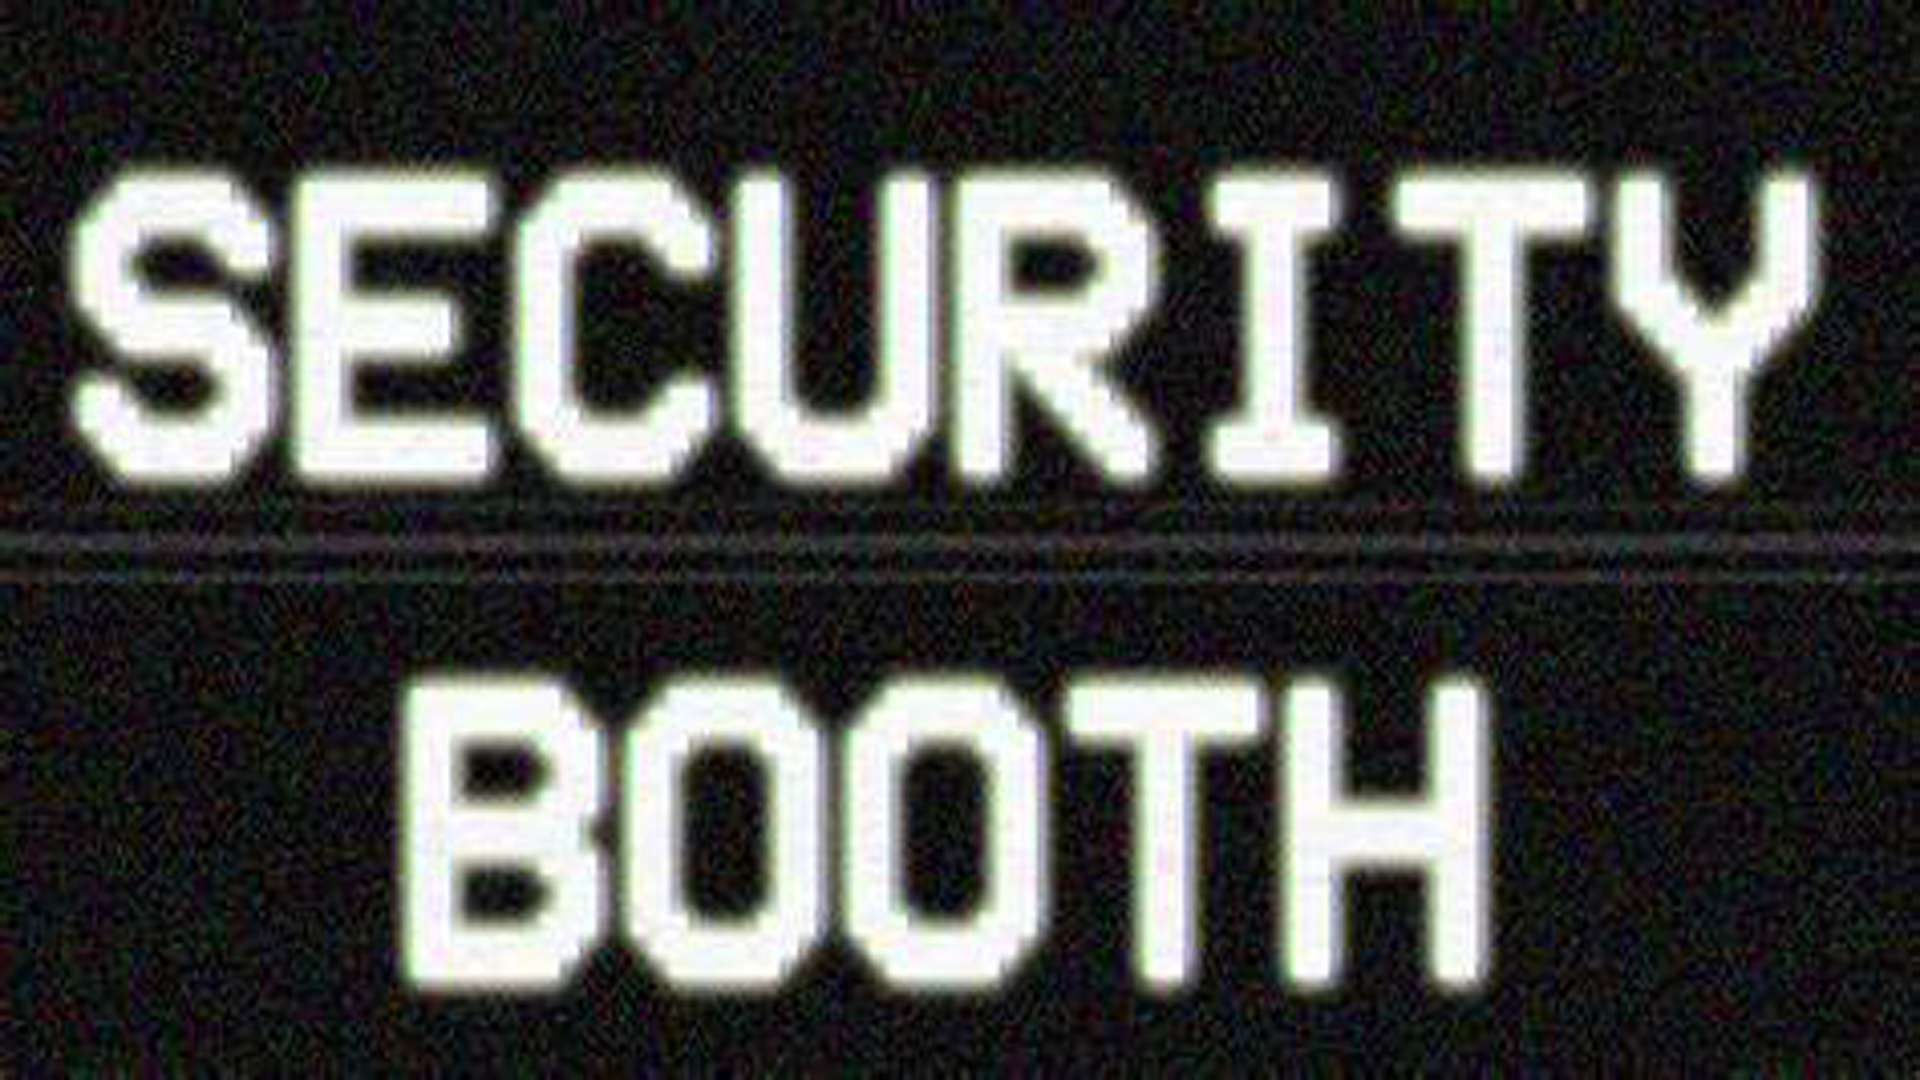 Let’s Play Security Booth